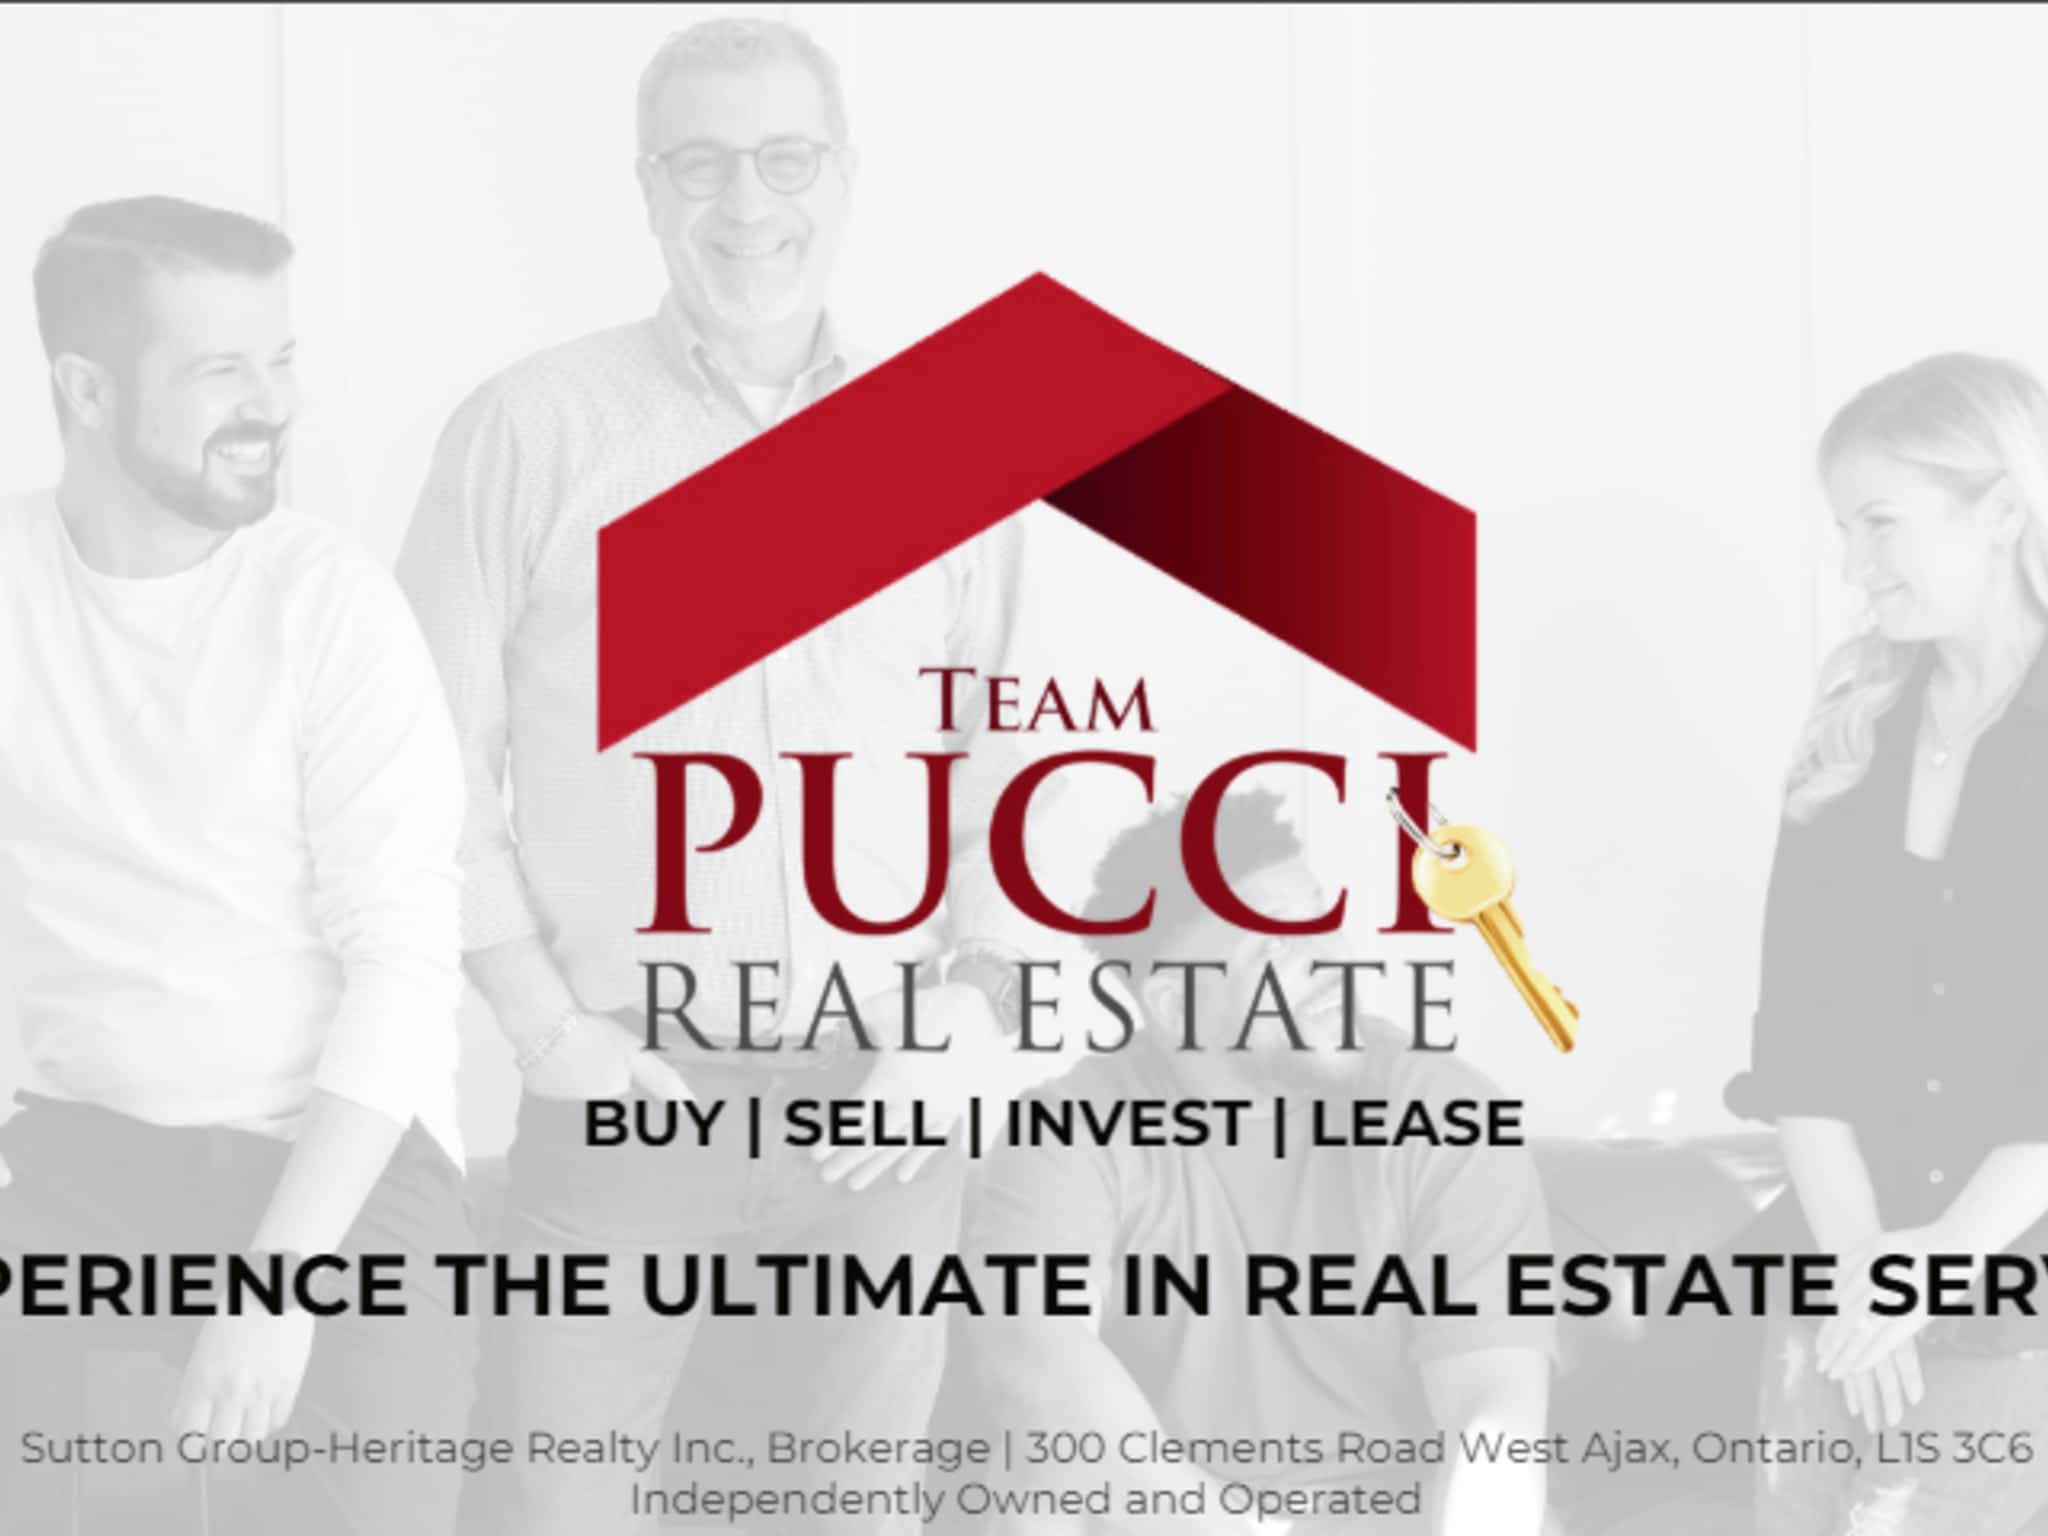 photo Angelo Pucci Realtor - Sutton Group Heritage Realty Inc. Brokerage